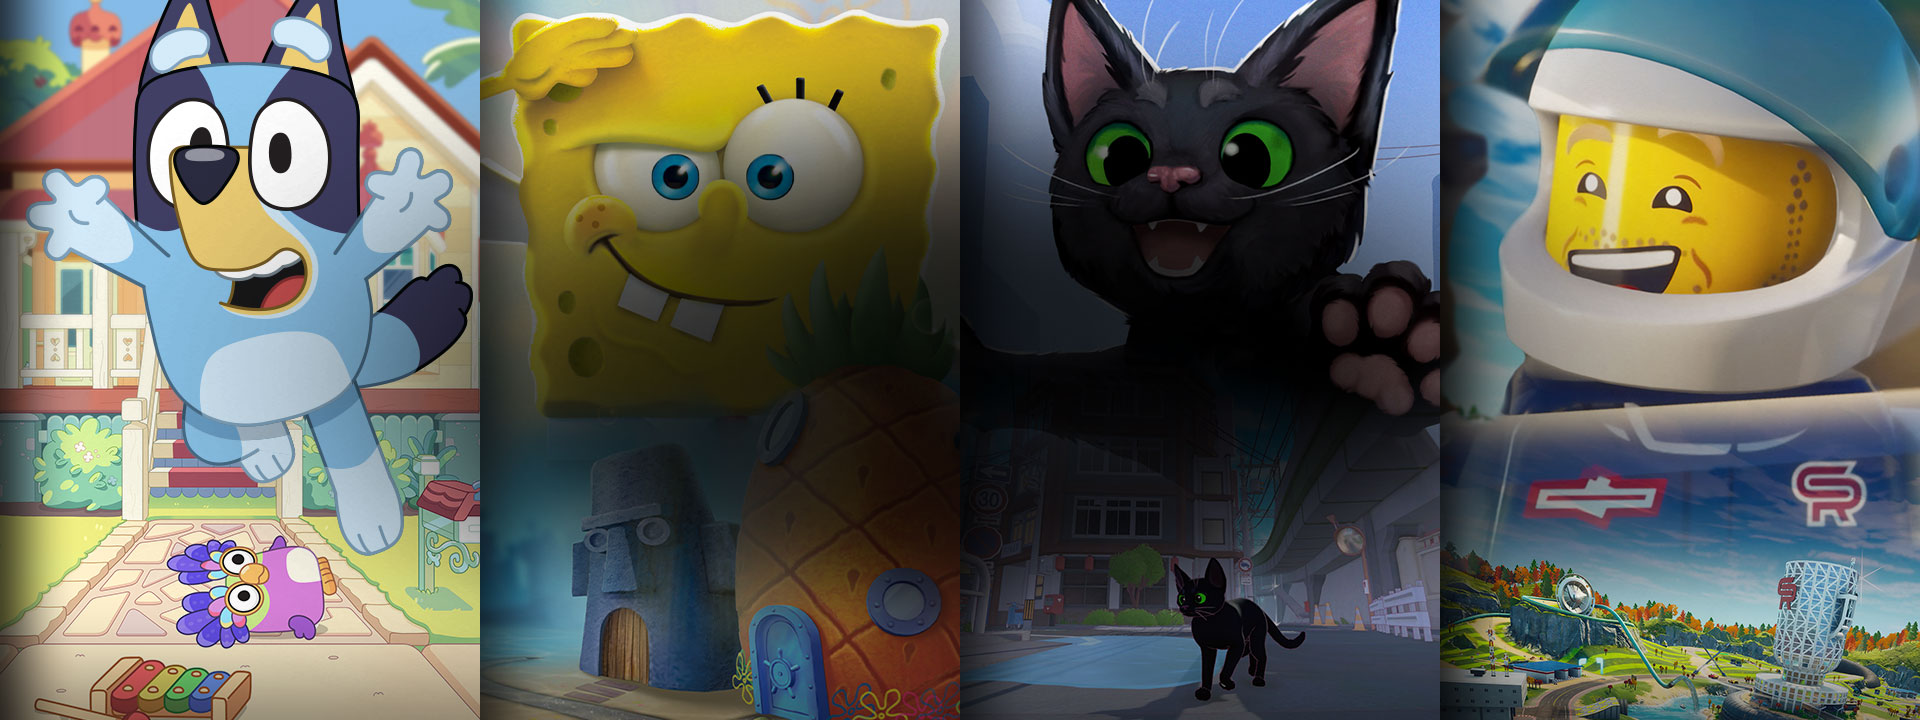 A selection of games available with Game Pass including Bluey, SpongeBob SquarePants: Battle for Bikini Bottom – Rehydrated, Little Kitty Big City, and LEGO 2K Drive.